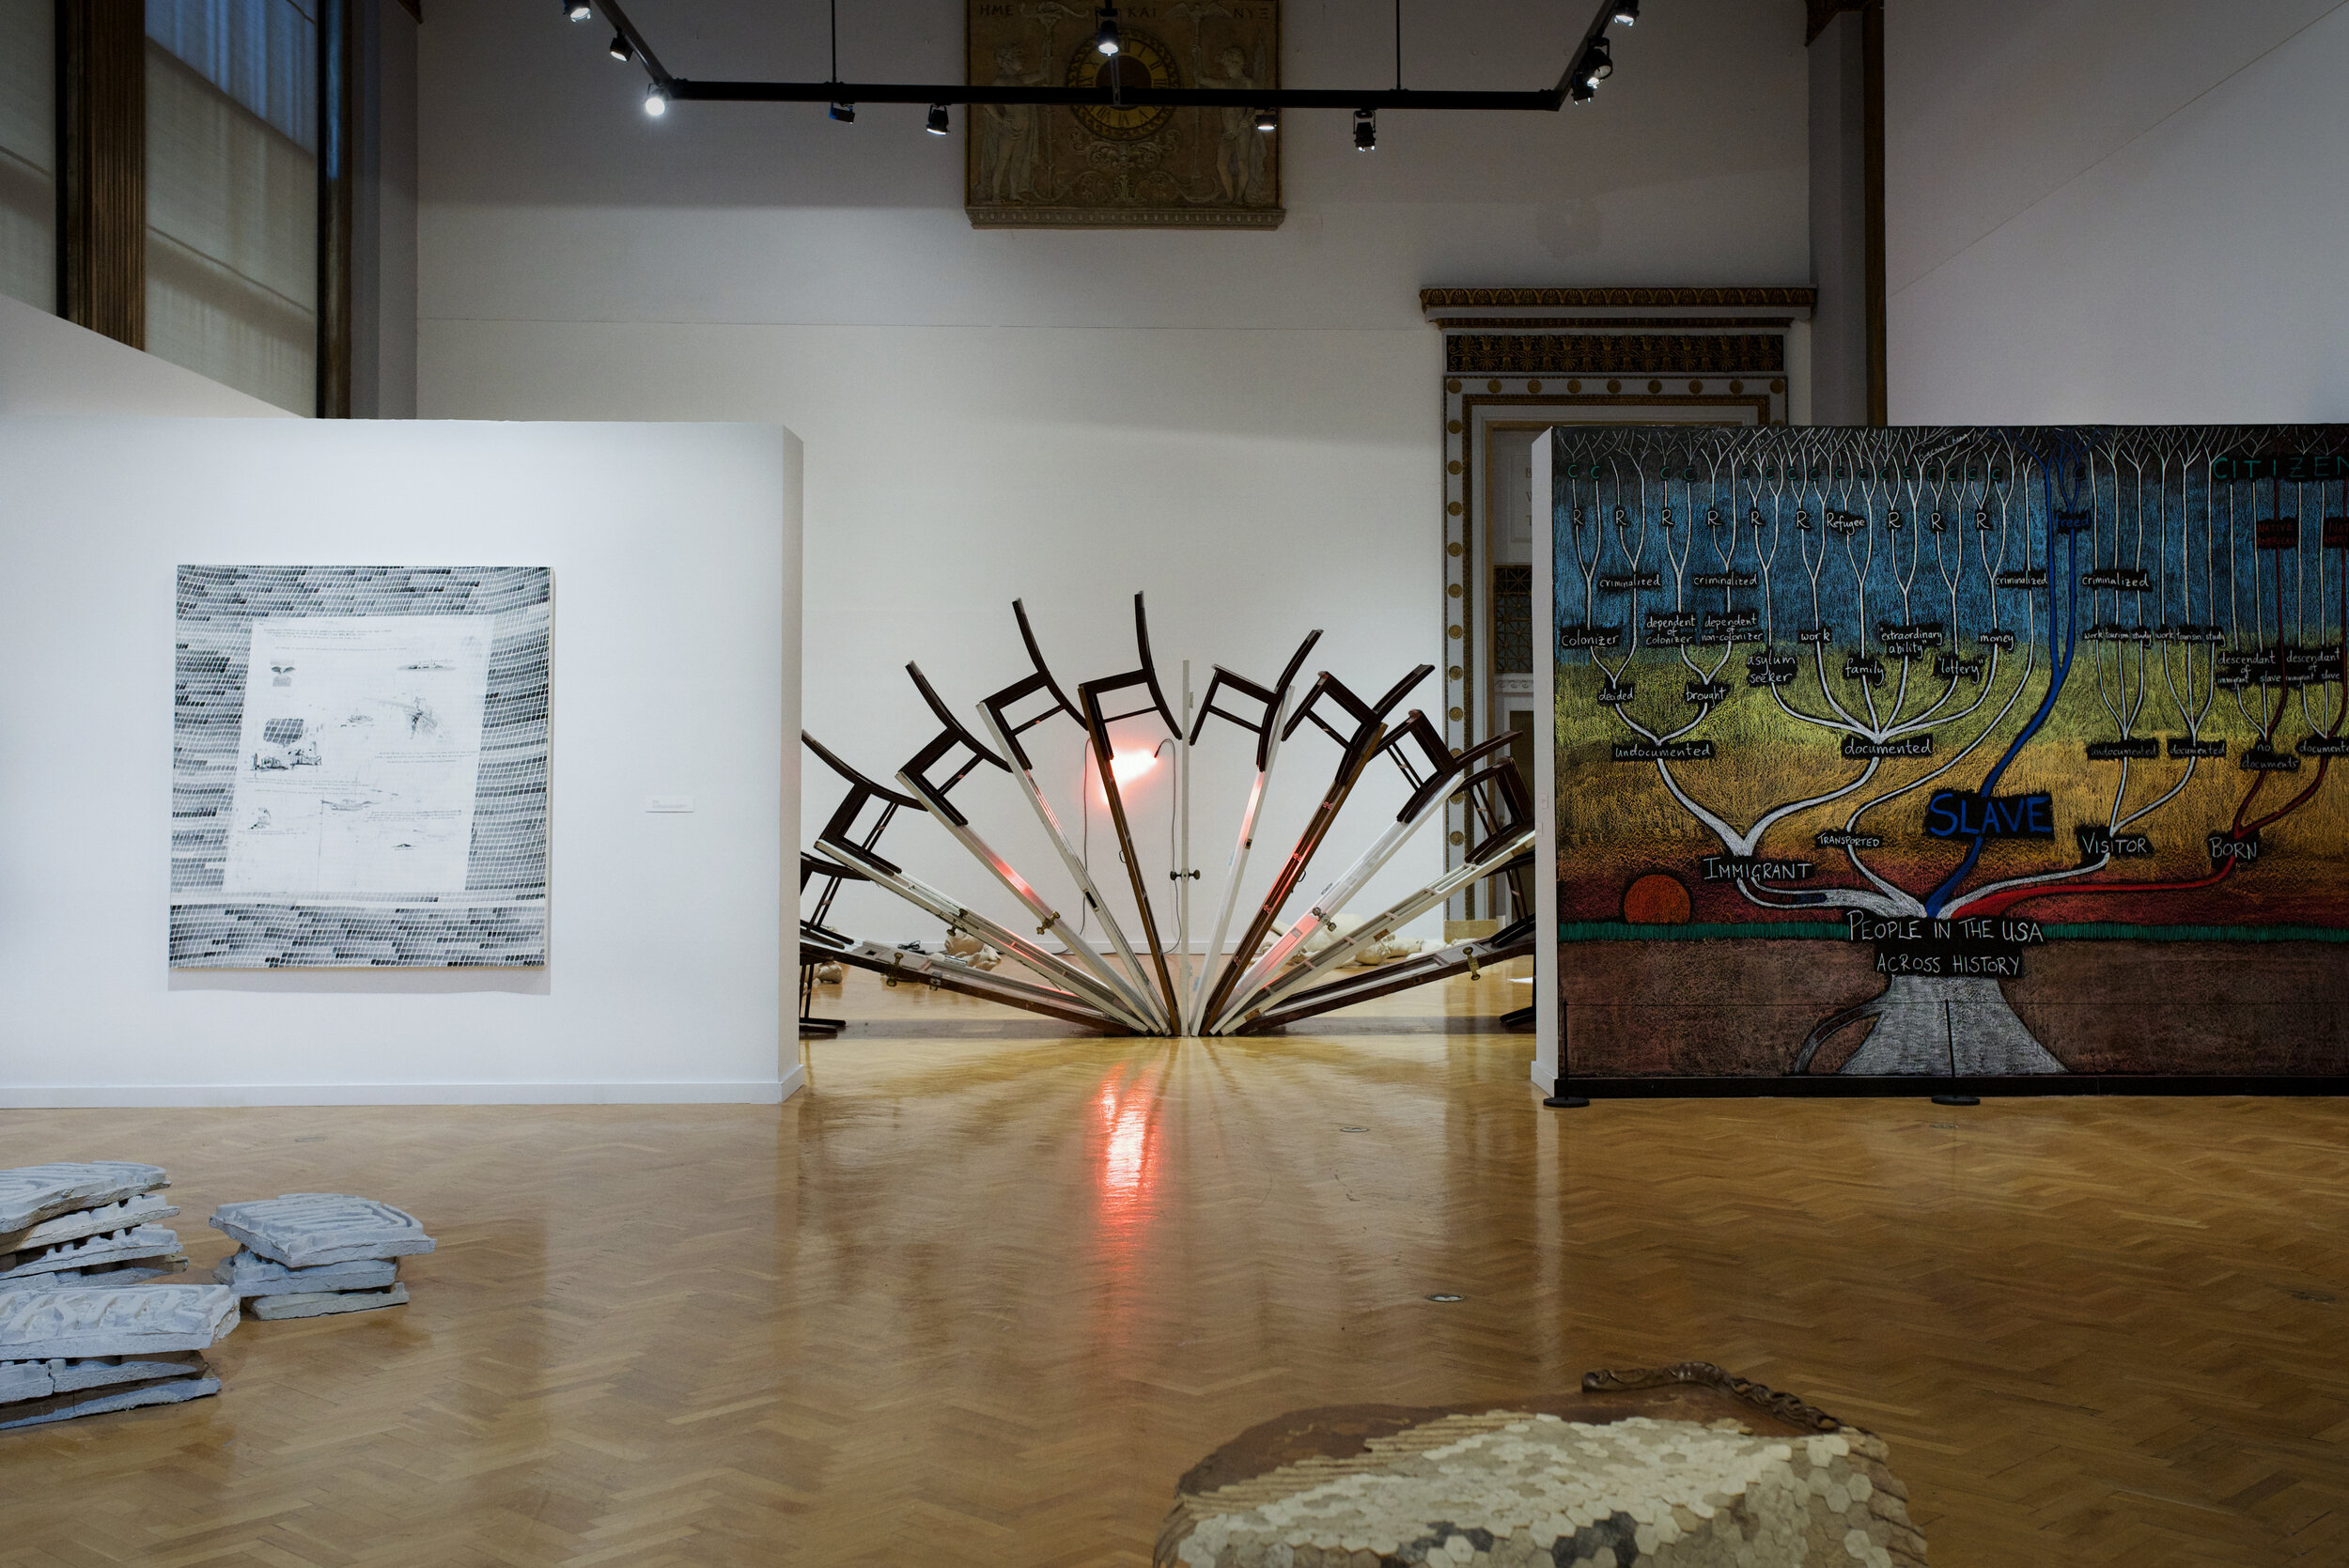  Installation view of work, left to right: Derek Chan, Alberto Aguilar, Eugenia Cheng – photo by Gloria Arroyo. 